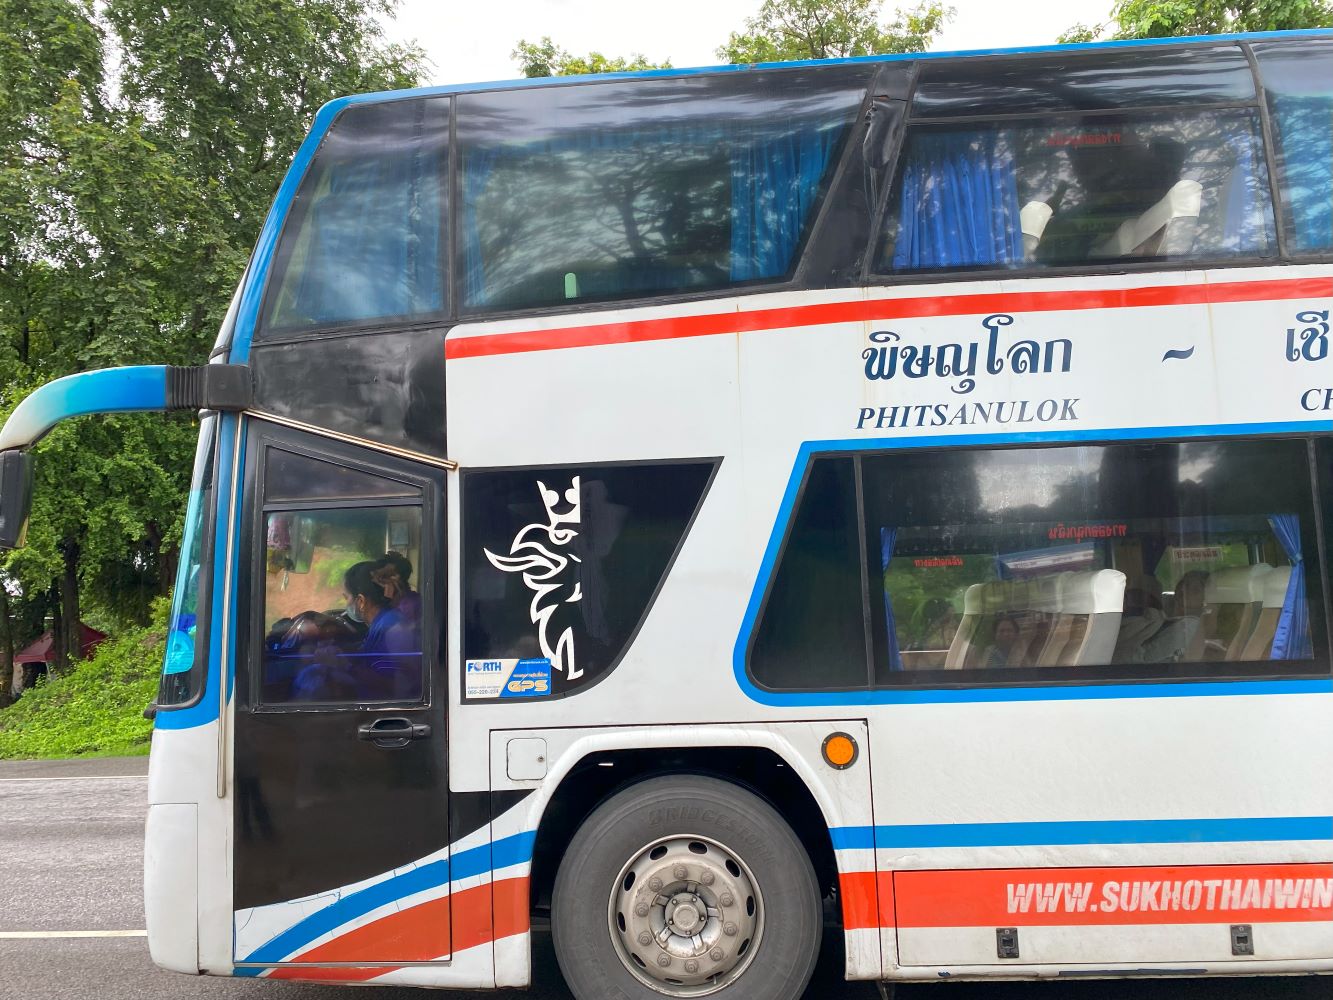 From Sukhothai to Chiang Mai by bus